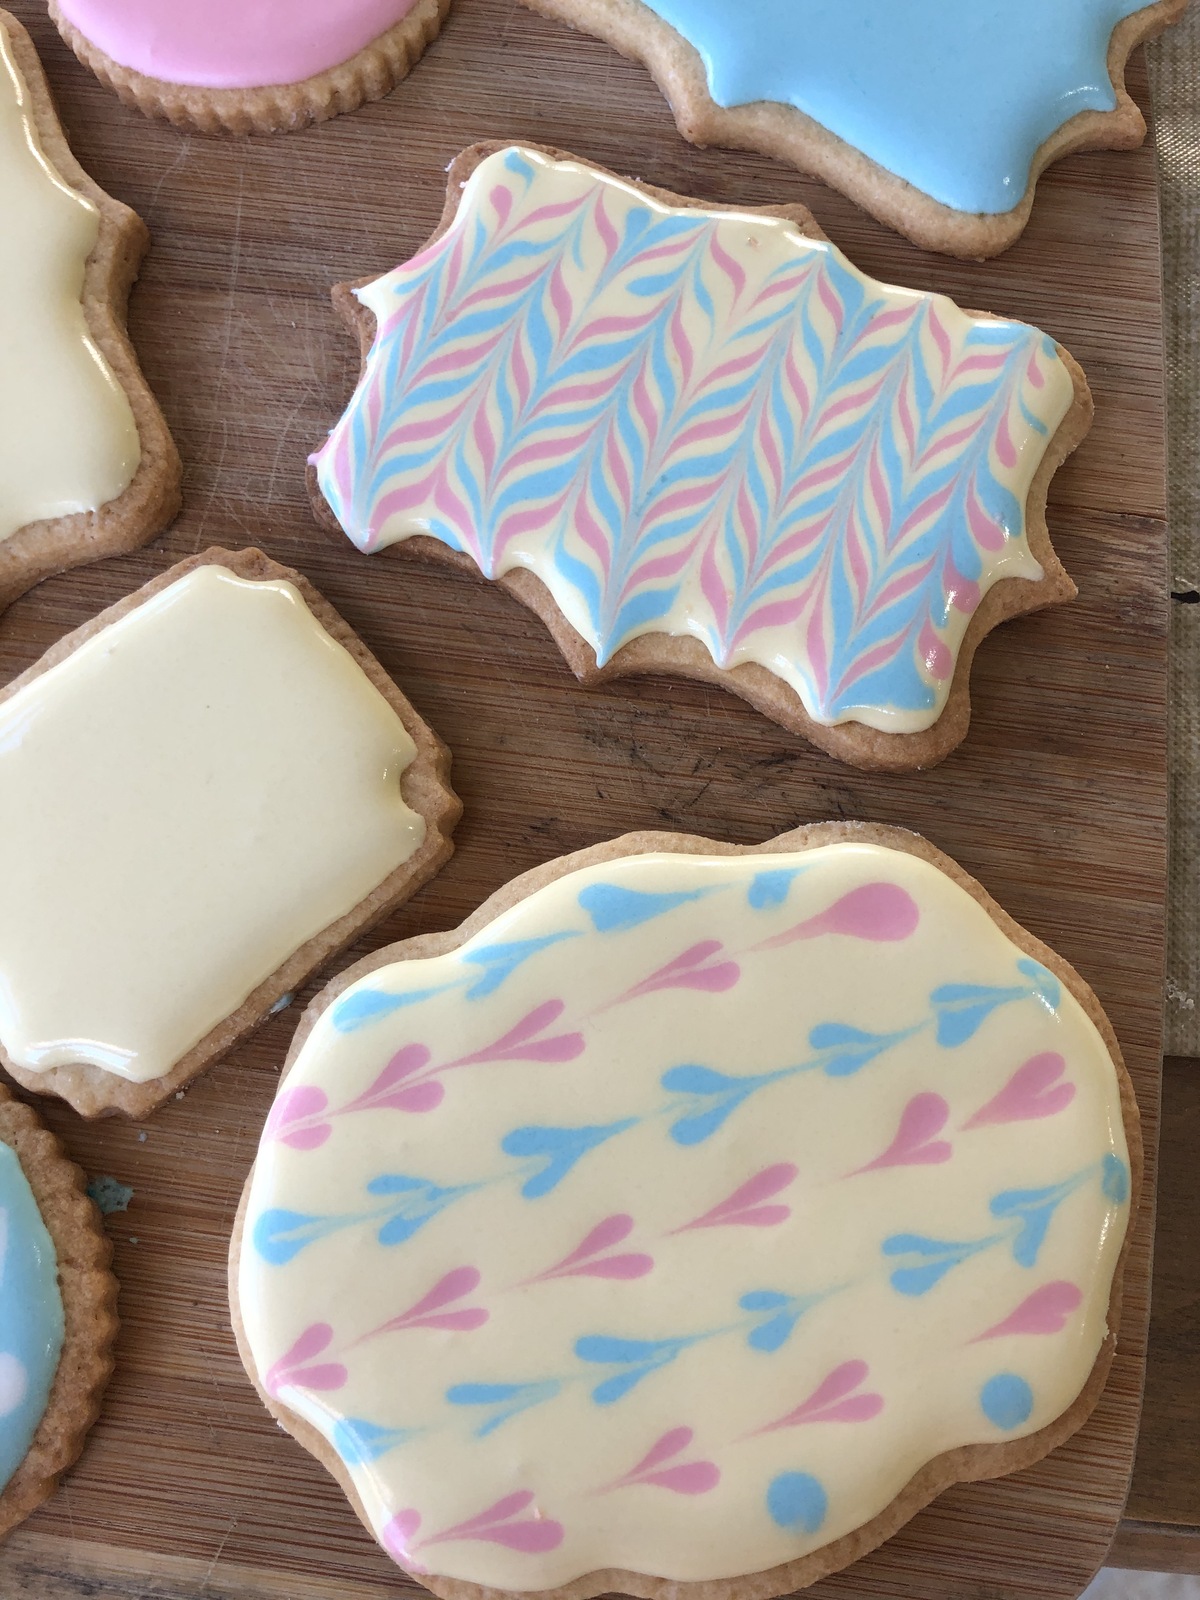 Homemade frosted sugar cookies. Sell by the dozen. - $18.00 - $31.00